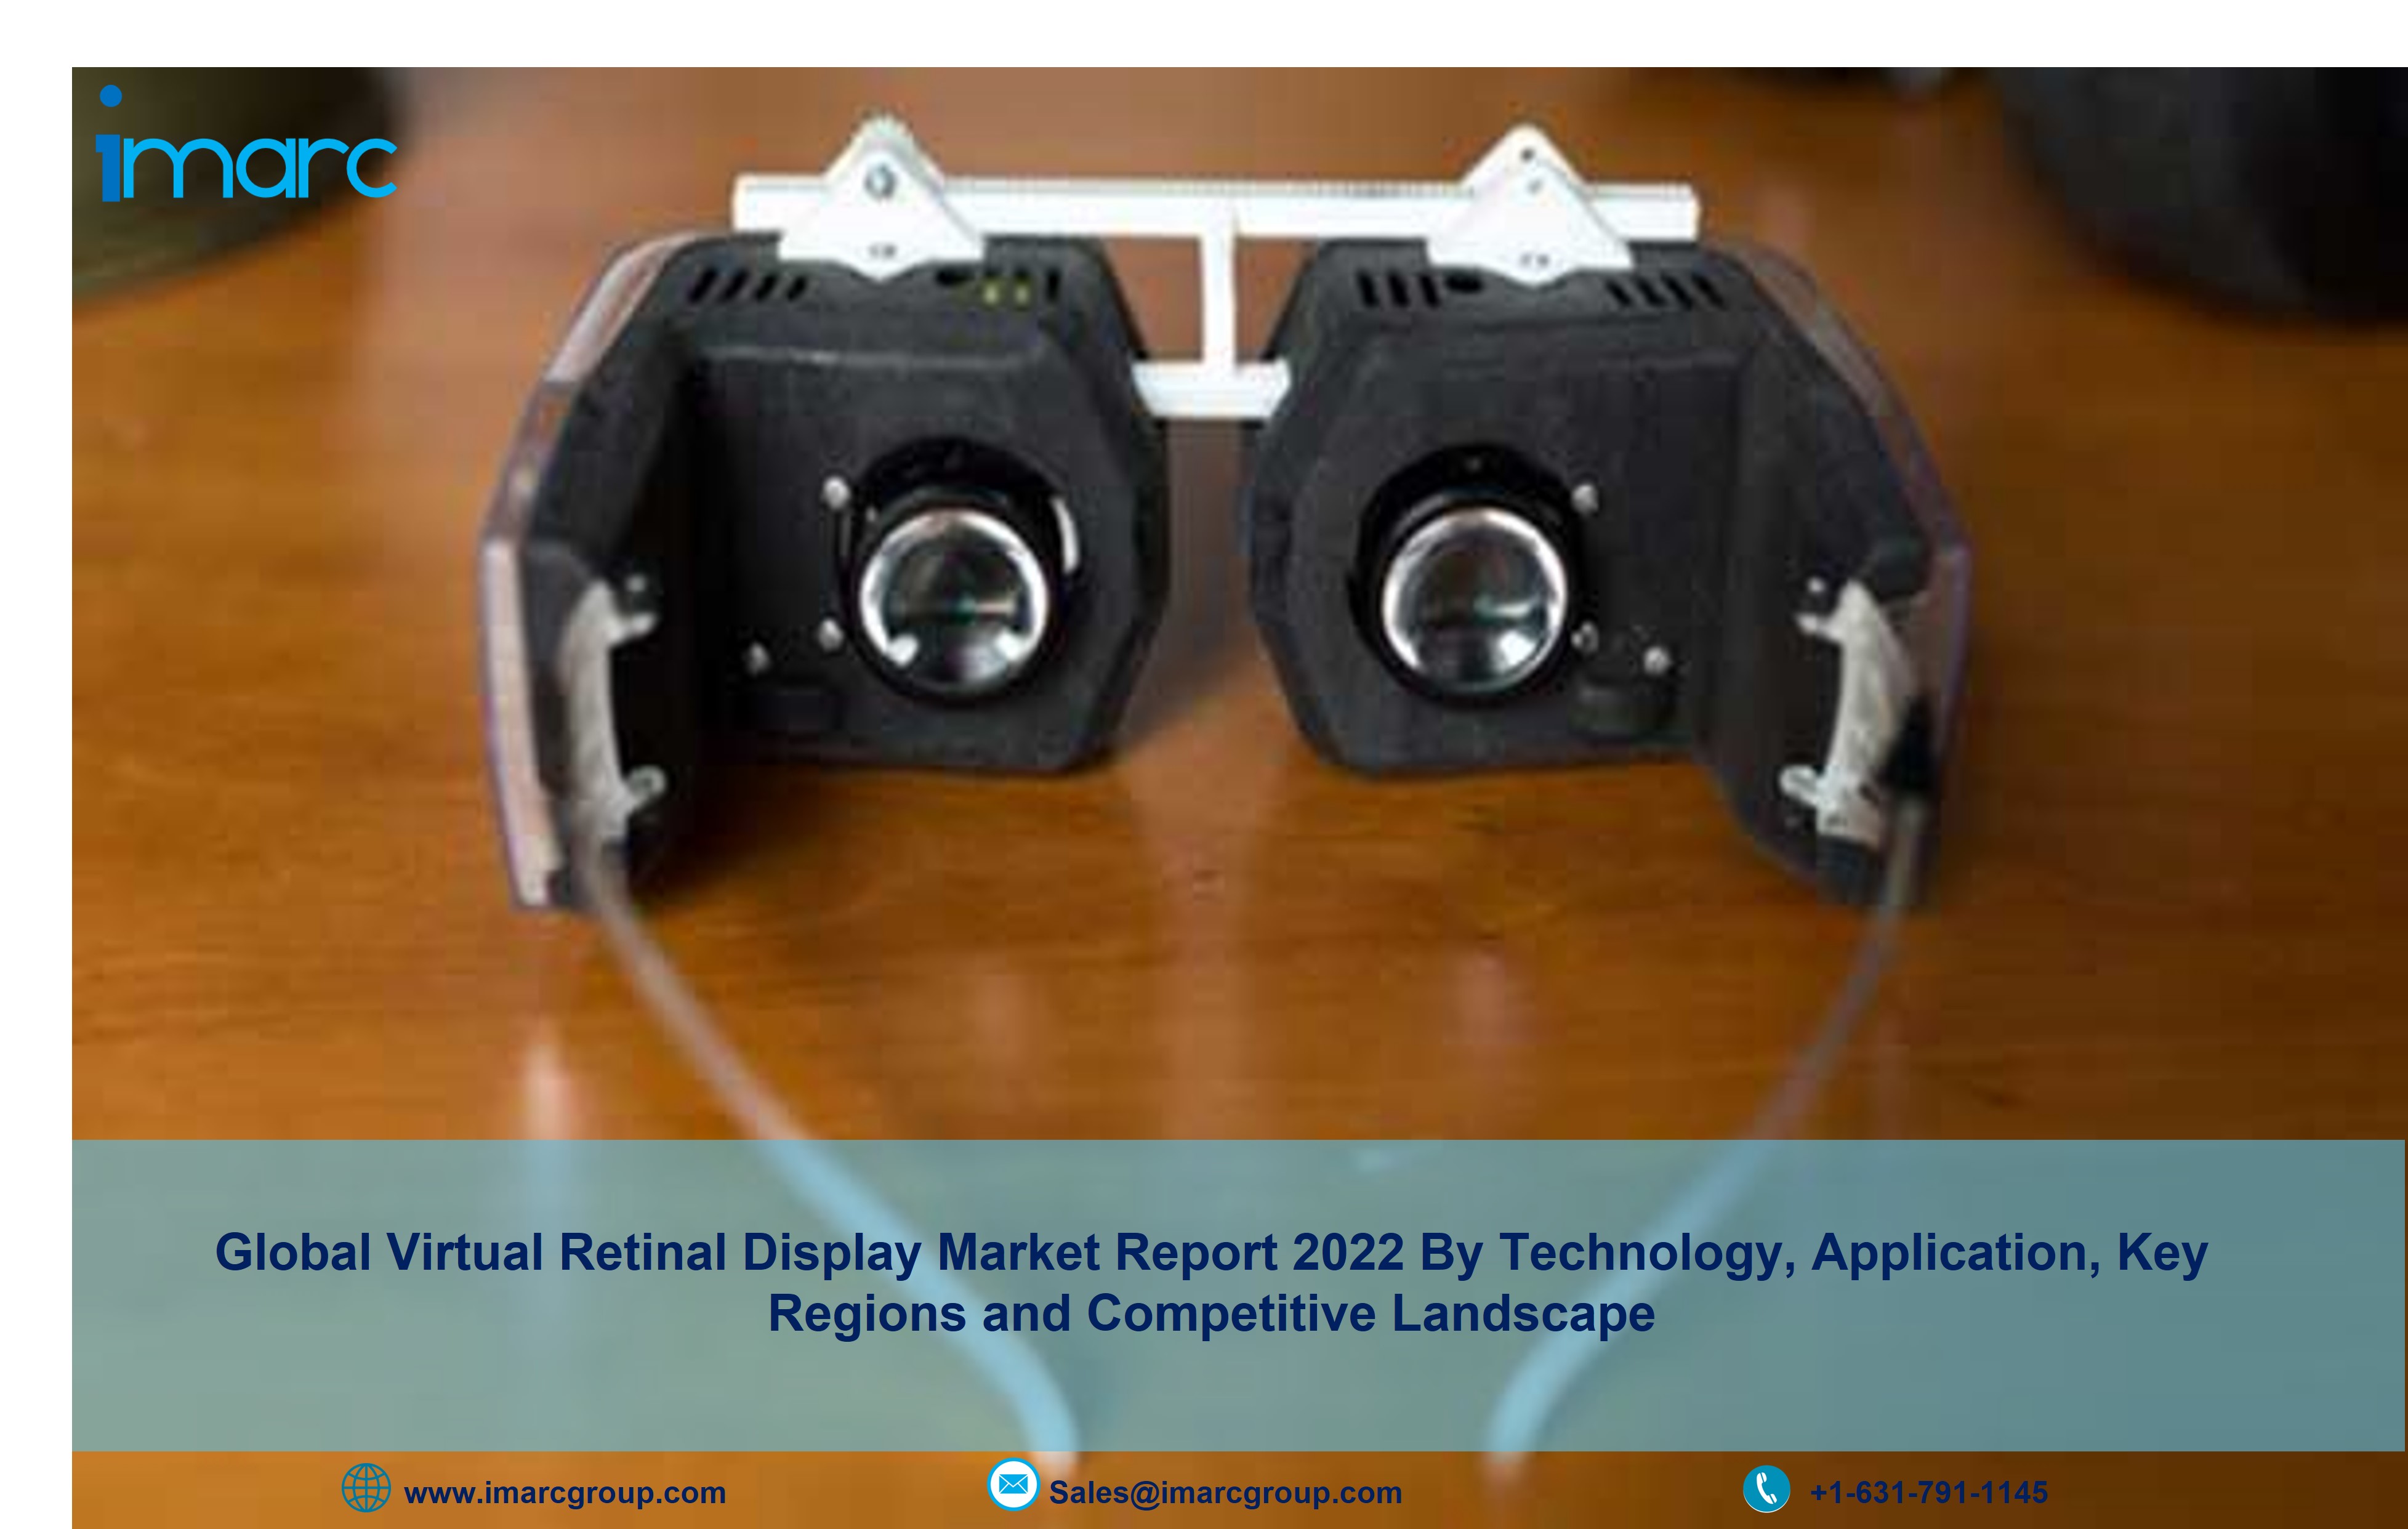 Virtual Retinal Display Market to Reach USD 77.91 Billion by 2027 at CAGR of 36.50% | Industry Forecast, Report 2022-2027